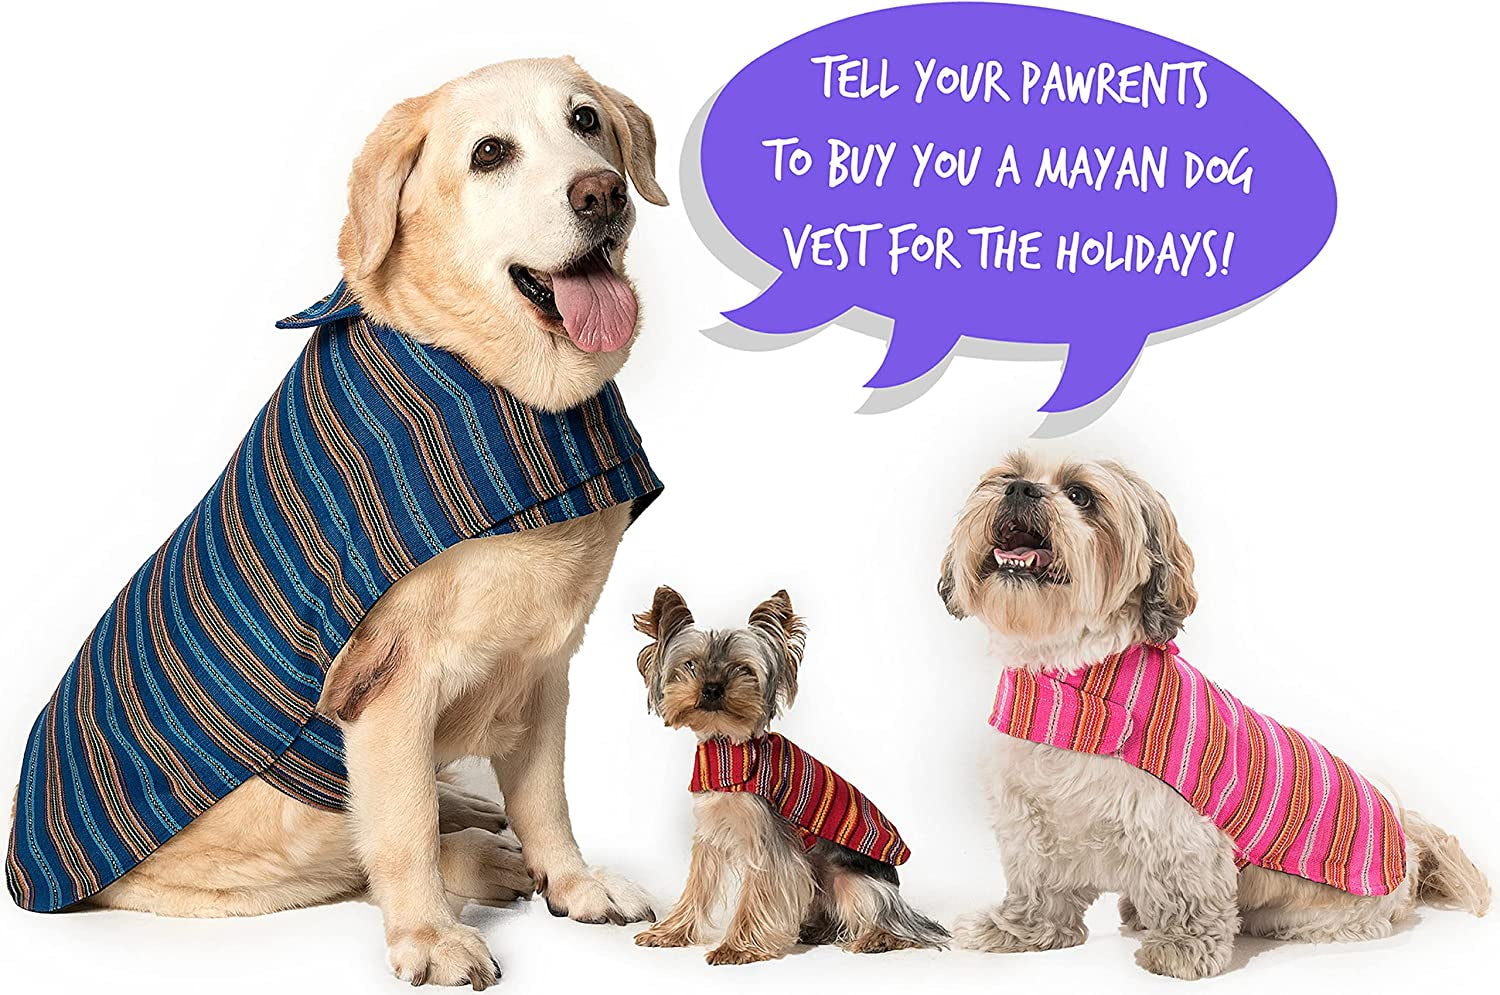 Mayan Dog Clothing for Dogs. Works As, Coat, Sweater, Vest, Jacket, Stress Reliever. for XXS, Small, Medium, Large, XL, XXL Dogs (Any Size)